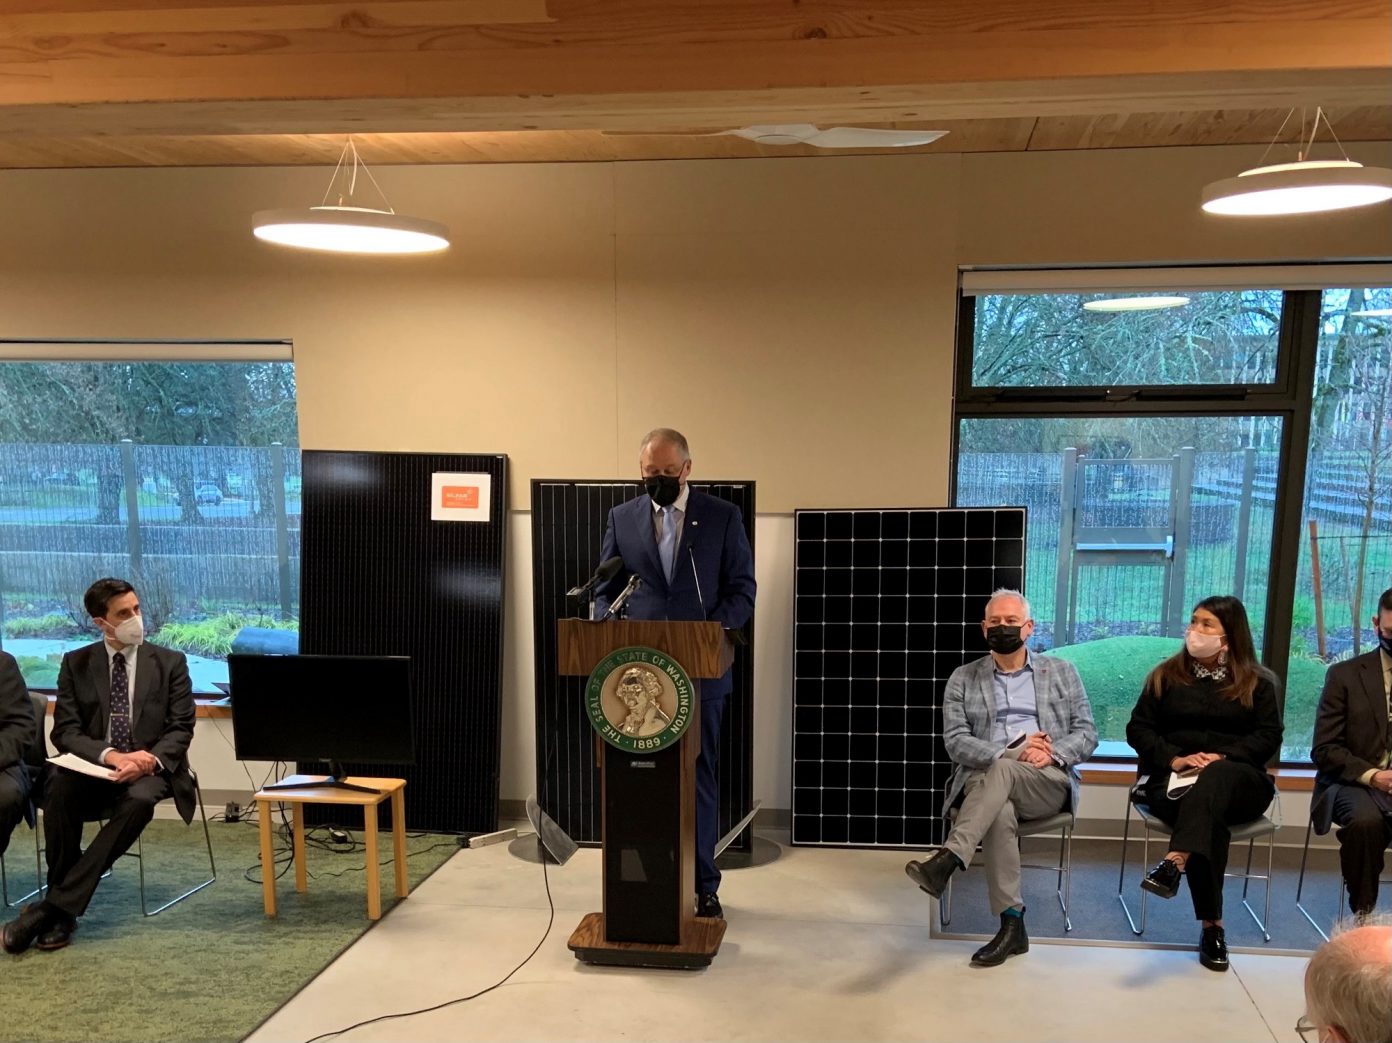 inslee-s-proposes-7-500-electric-car-rebate-and-1-000-e-bike-rebate-in-626-million-climate